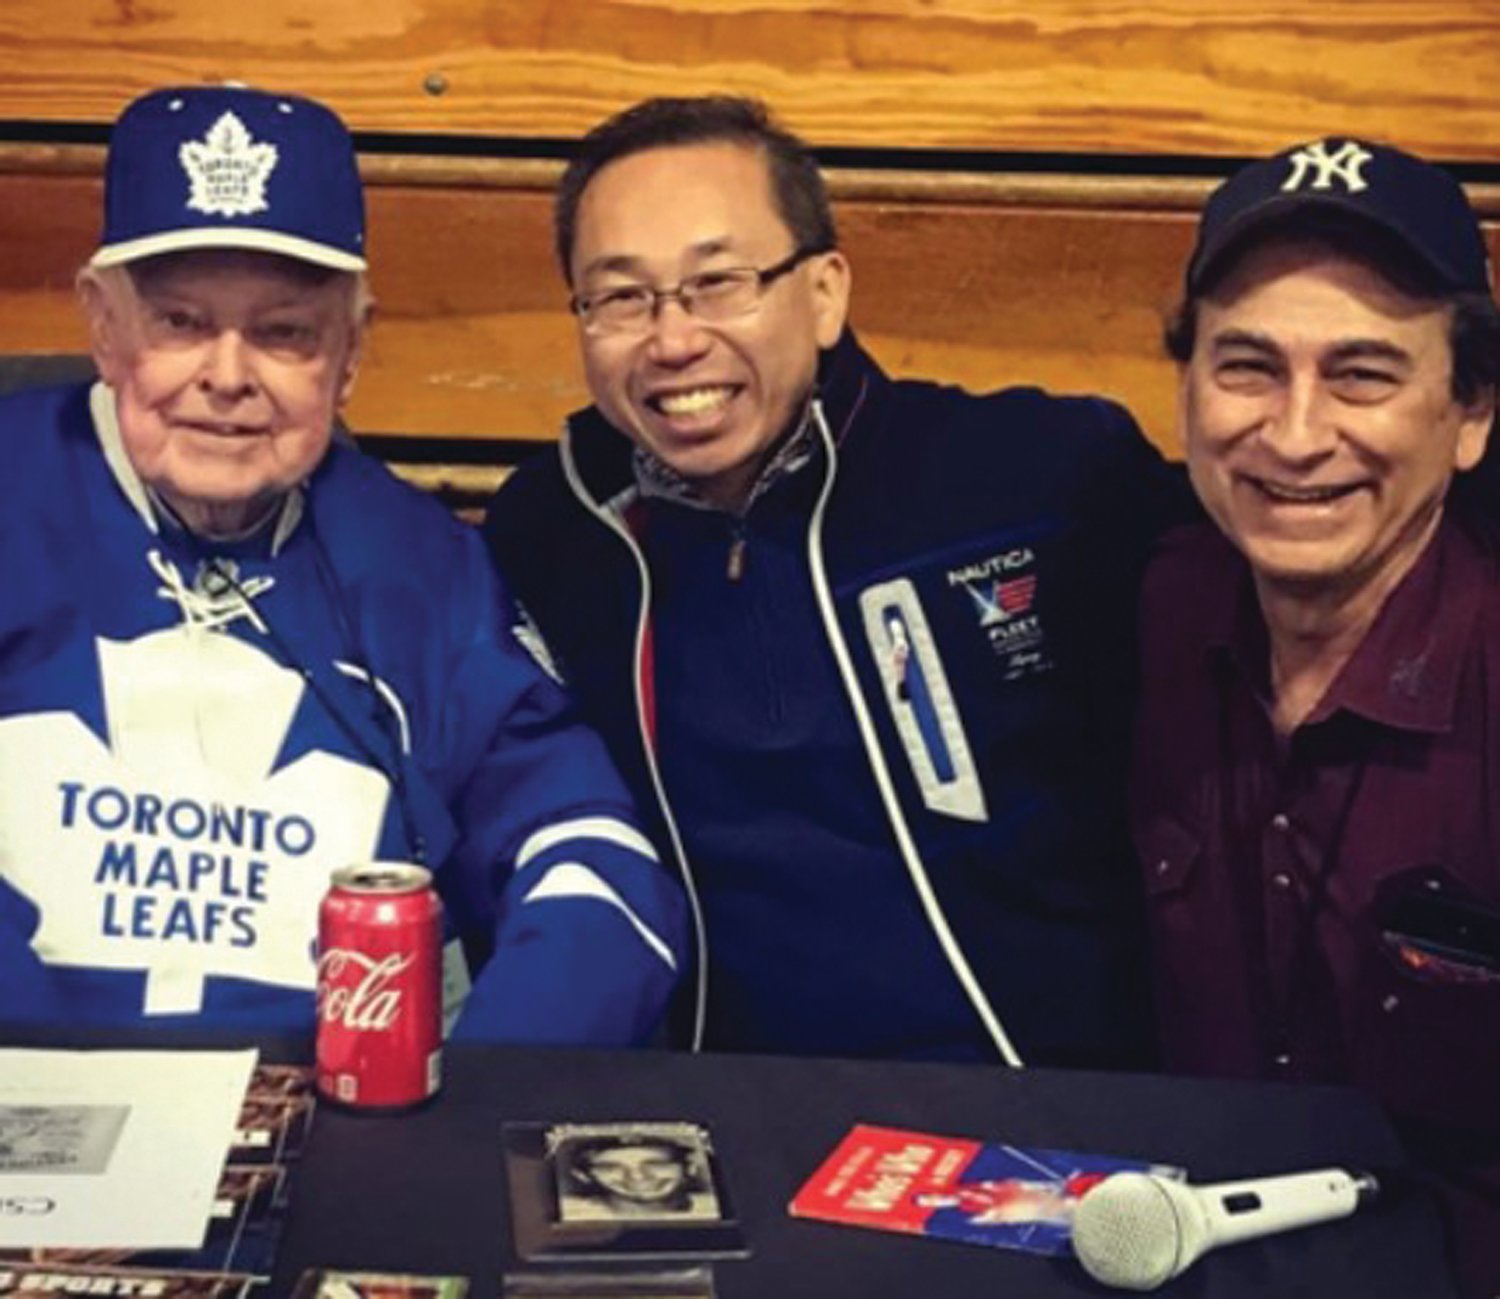 FAMILIAR FACE: Former Cranston Mayor Allan Fung, who has been a regular visitor at the Cranston Card and Collectibles Show is joined by promoter Mike Mango. (Submitted photos)